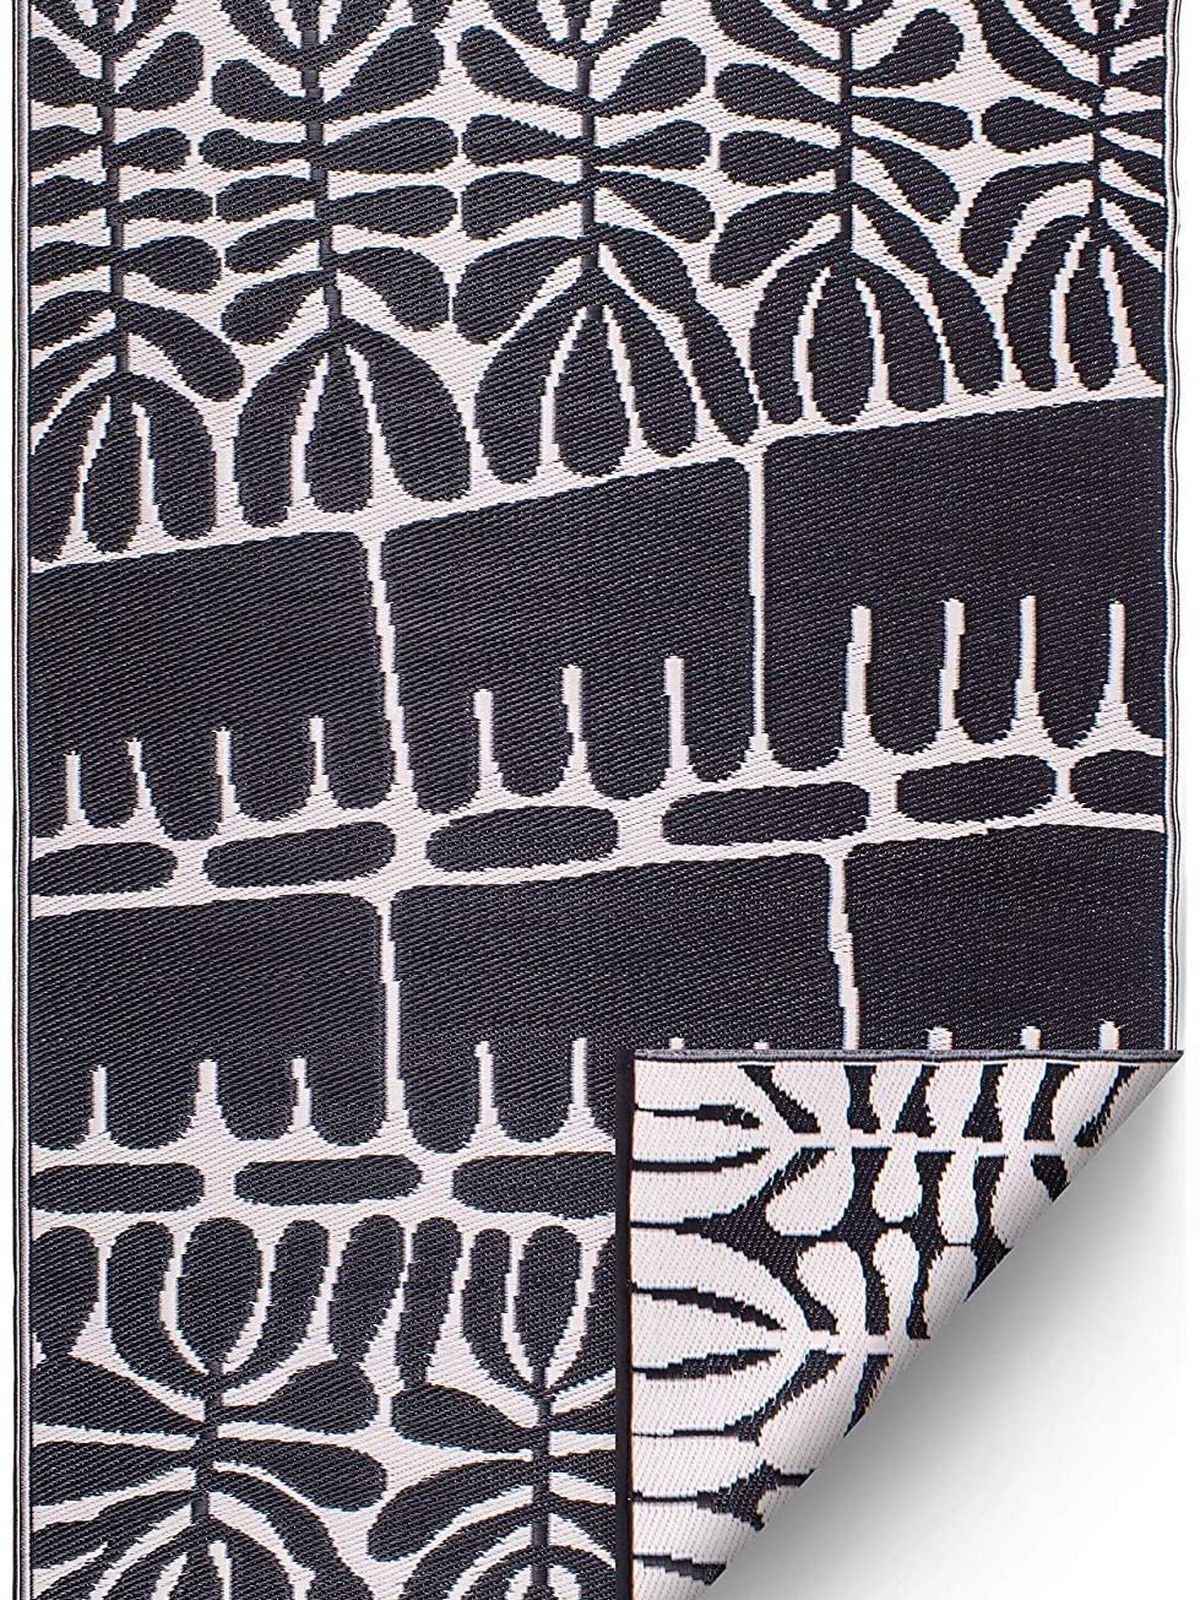 A black and white rug